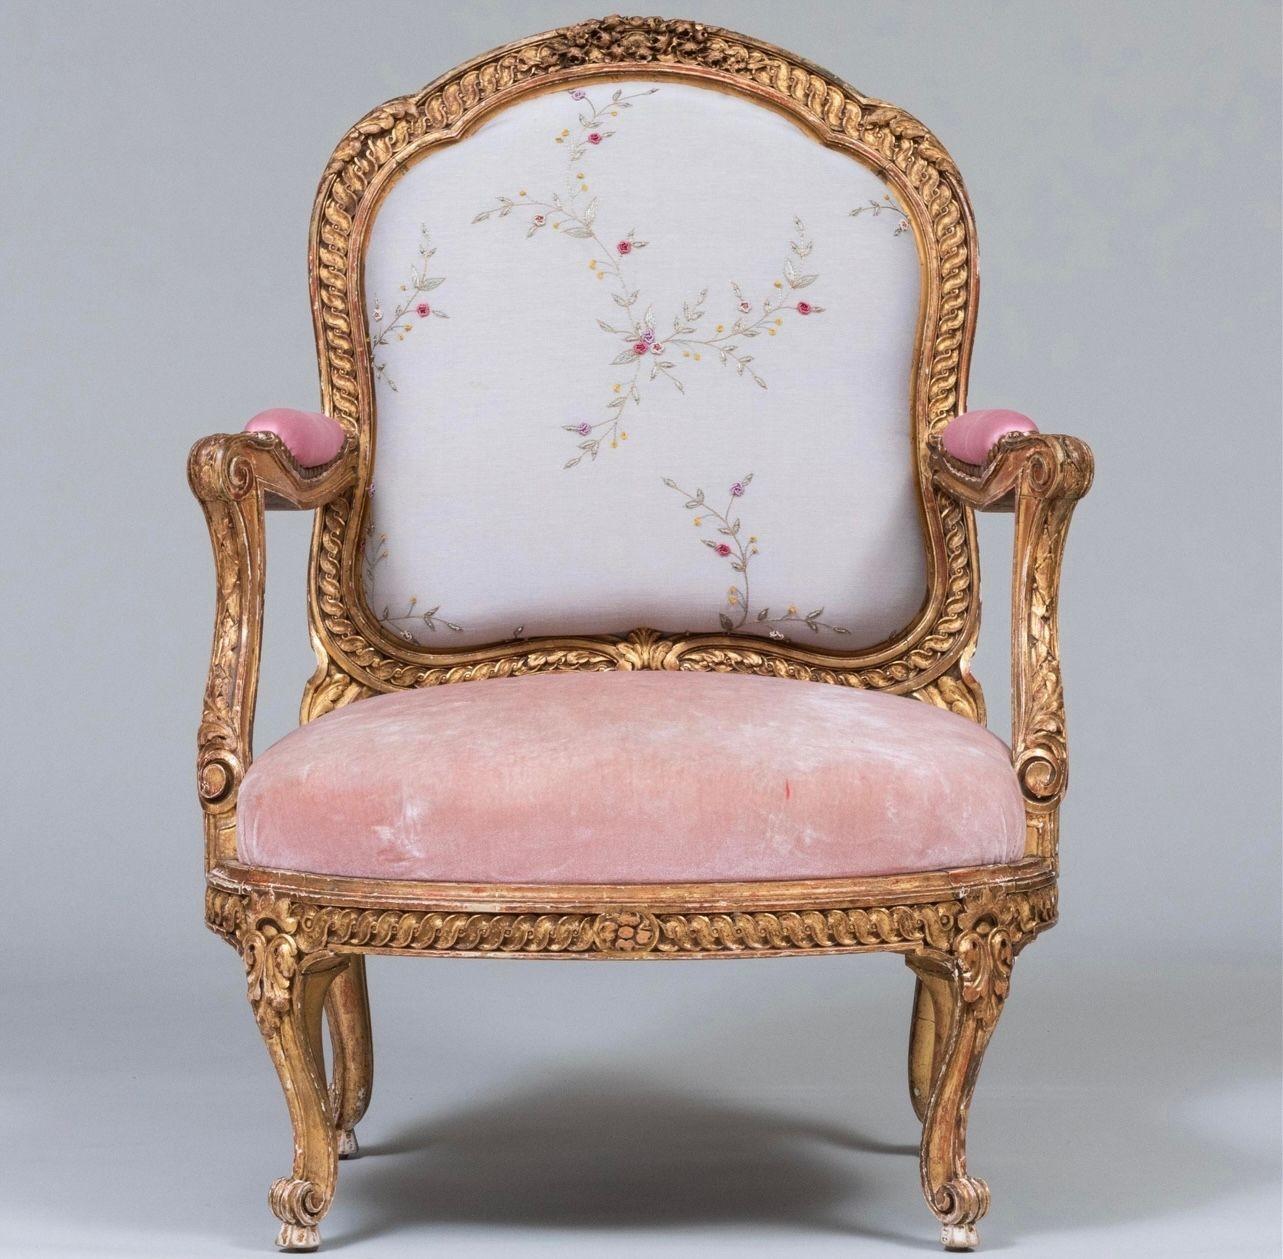 The chair is a copy of a suite of chairs by Nicholas Quinebert Foliot made for the Petit Trianon circa 1765-70. An original is in the Musee des Arts Décoratifs in Paris.